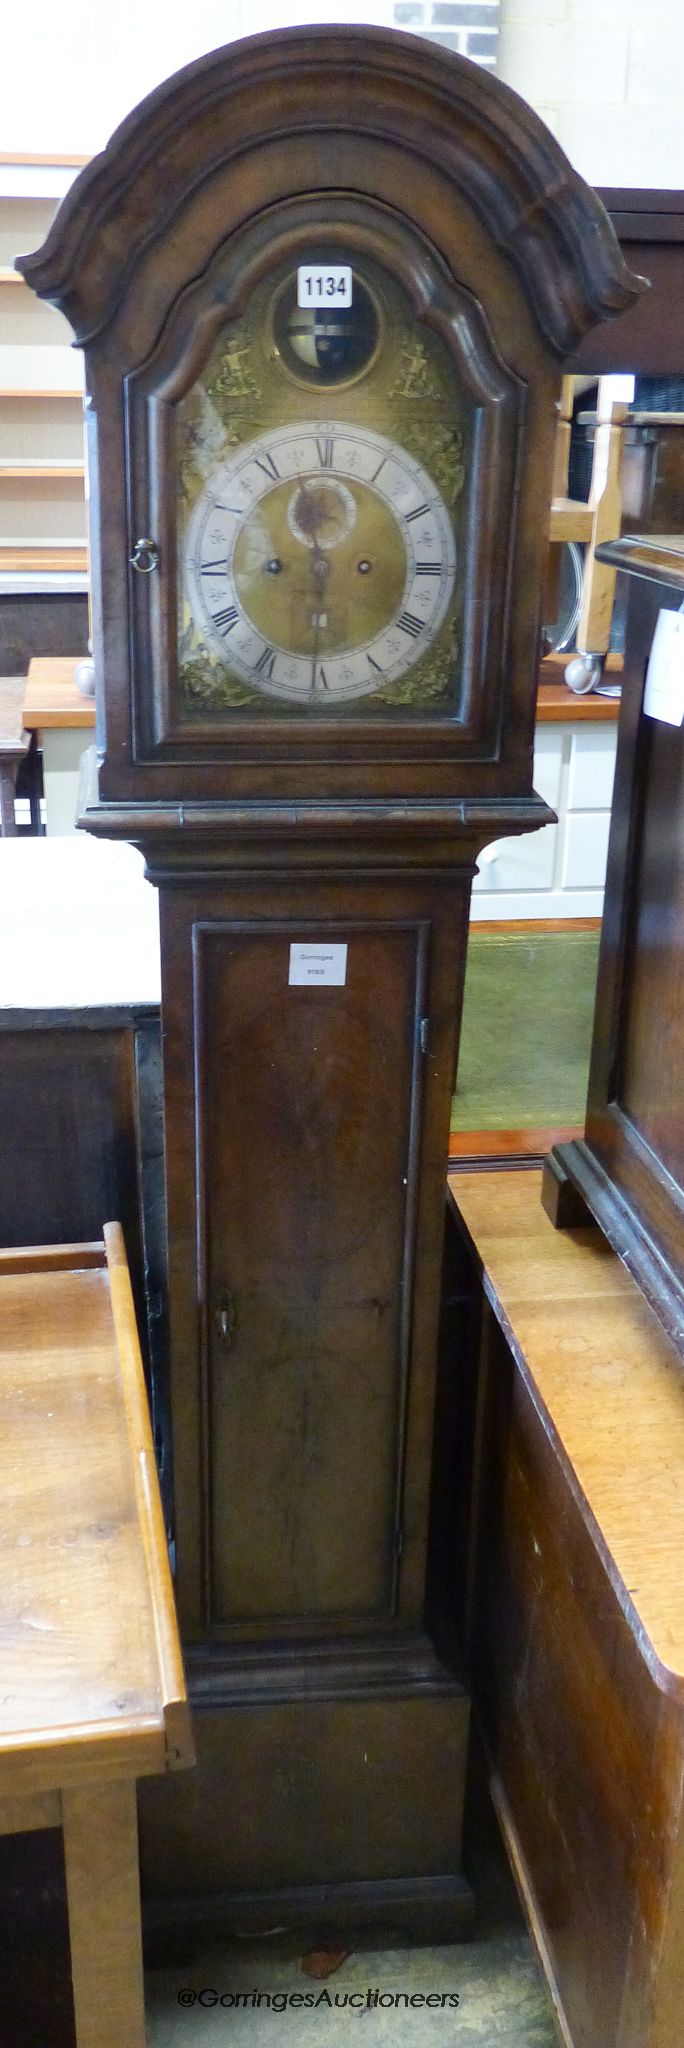 An 18th century style 8 day walnut grandmother clock, with globe and calendar aperture. H-156cm.